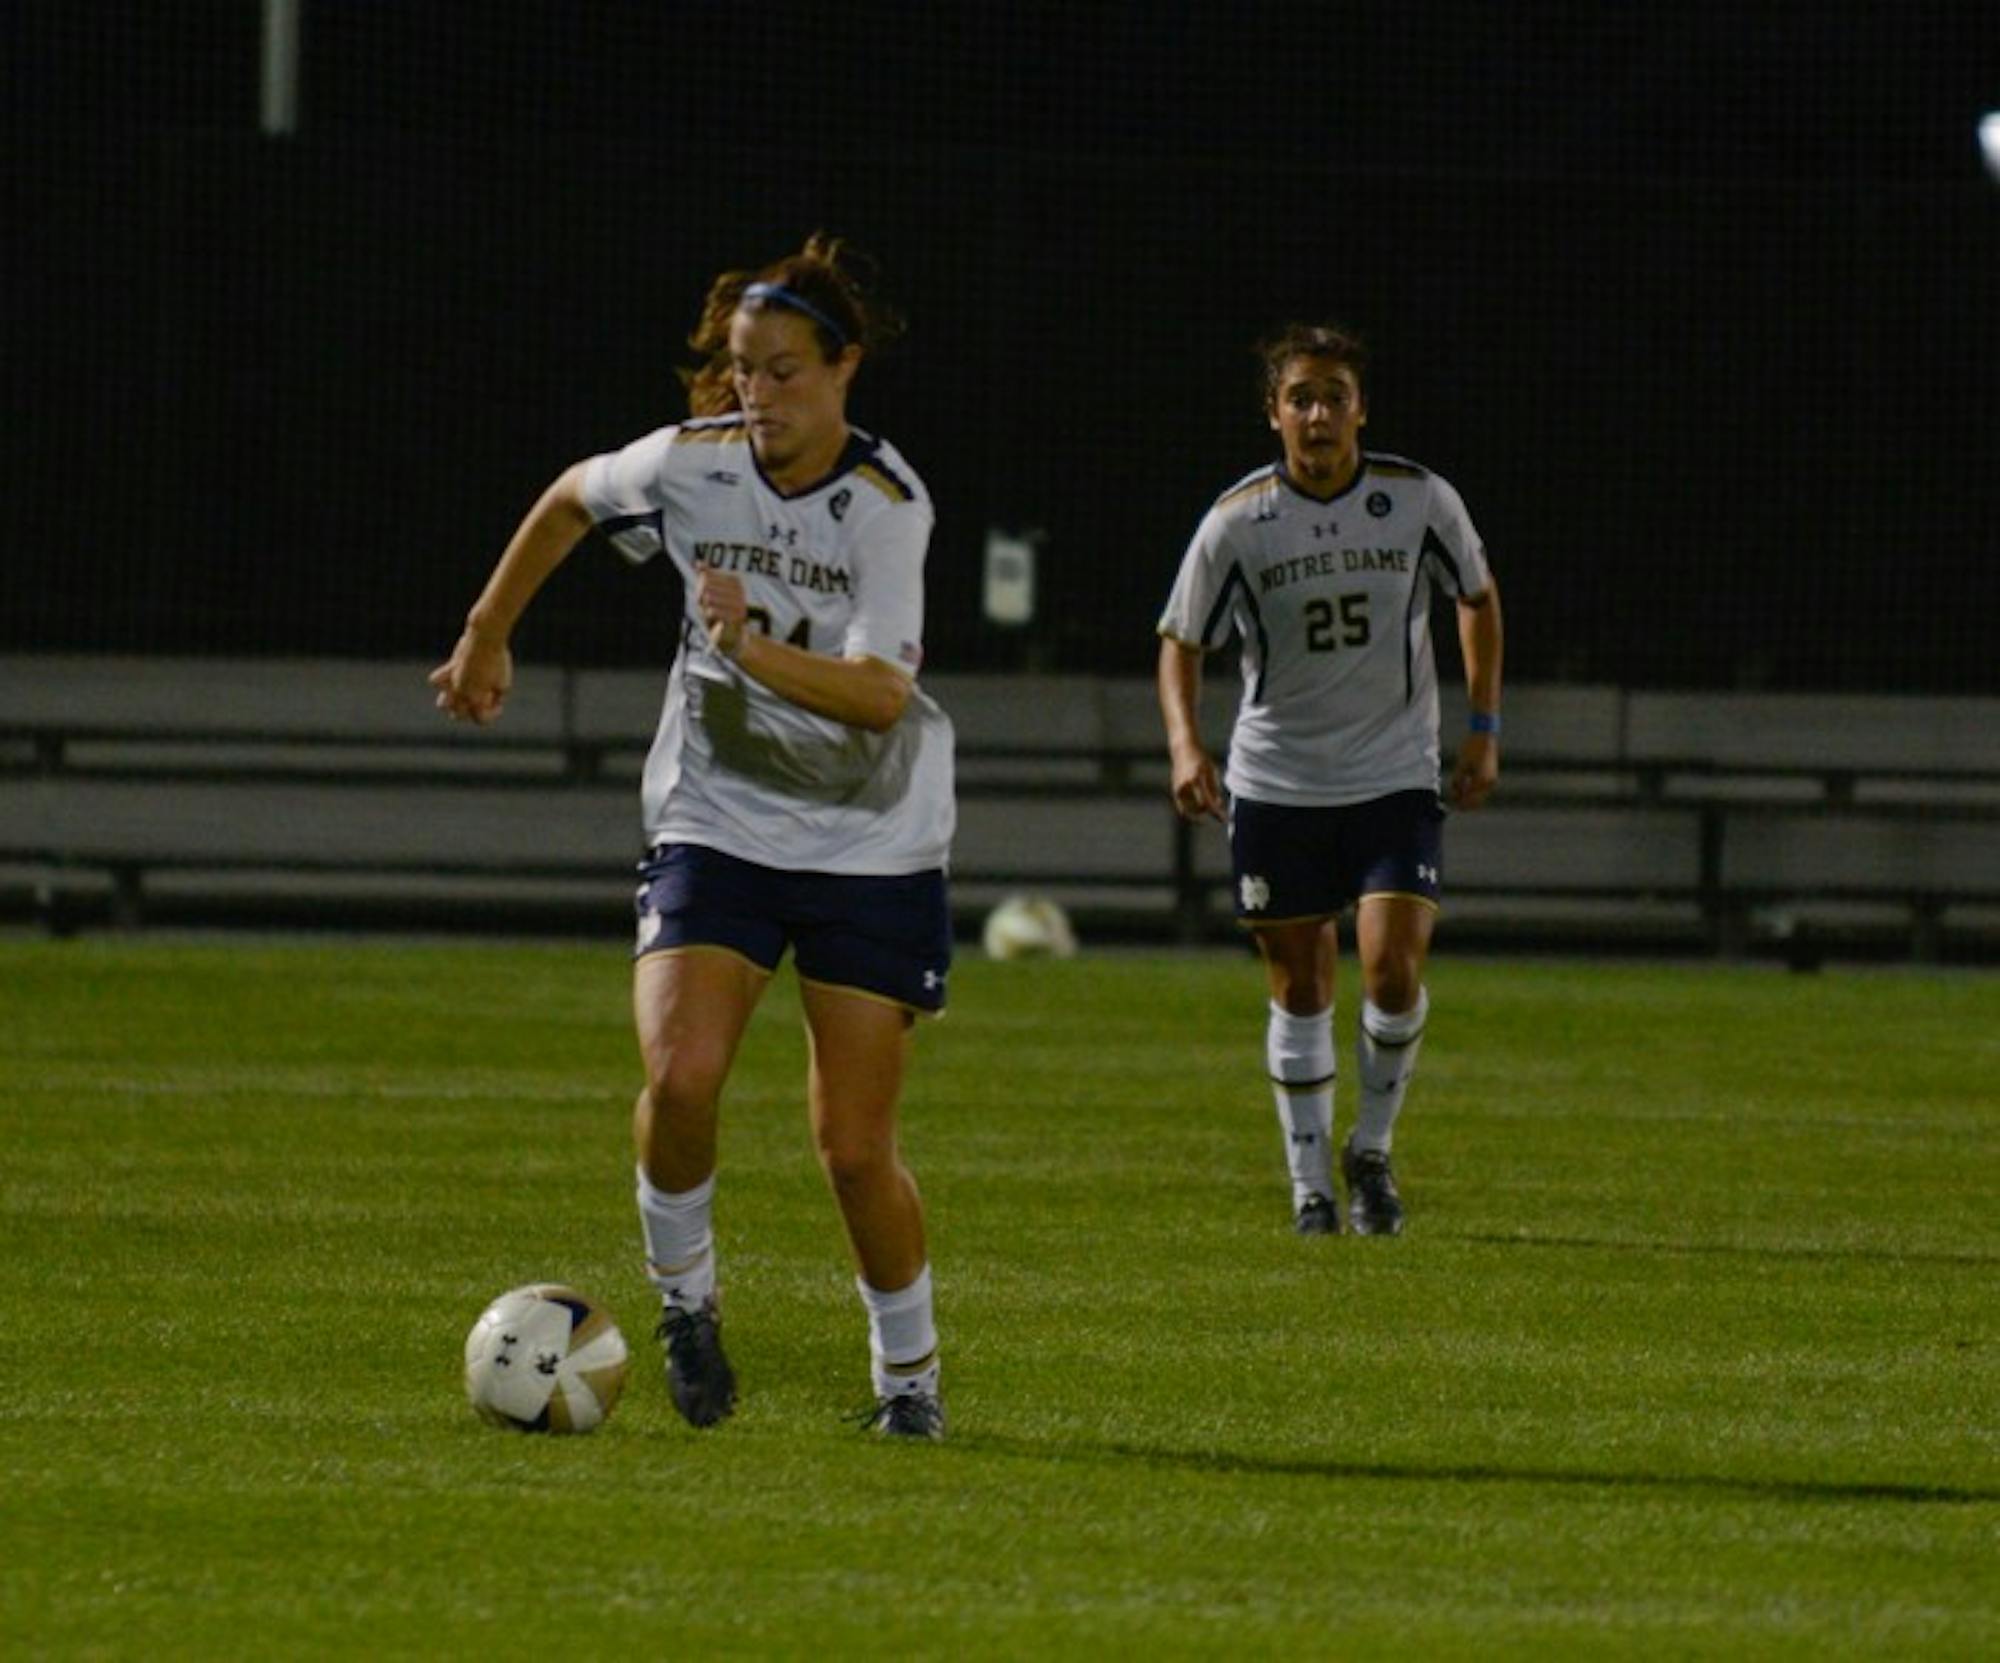 Irish senior defender and captain Katie Naughton dribbles up the field during Notre Dame’s 2-1 win over Santa Clara on Aug. 28.Irish senior defender and captain Katie Naughton dribbles up the field during Notre Dame’s 2-1 win over Santa Clara on Aug. 28.